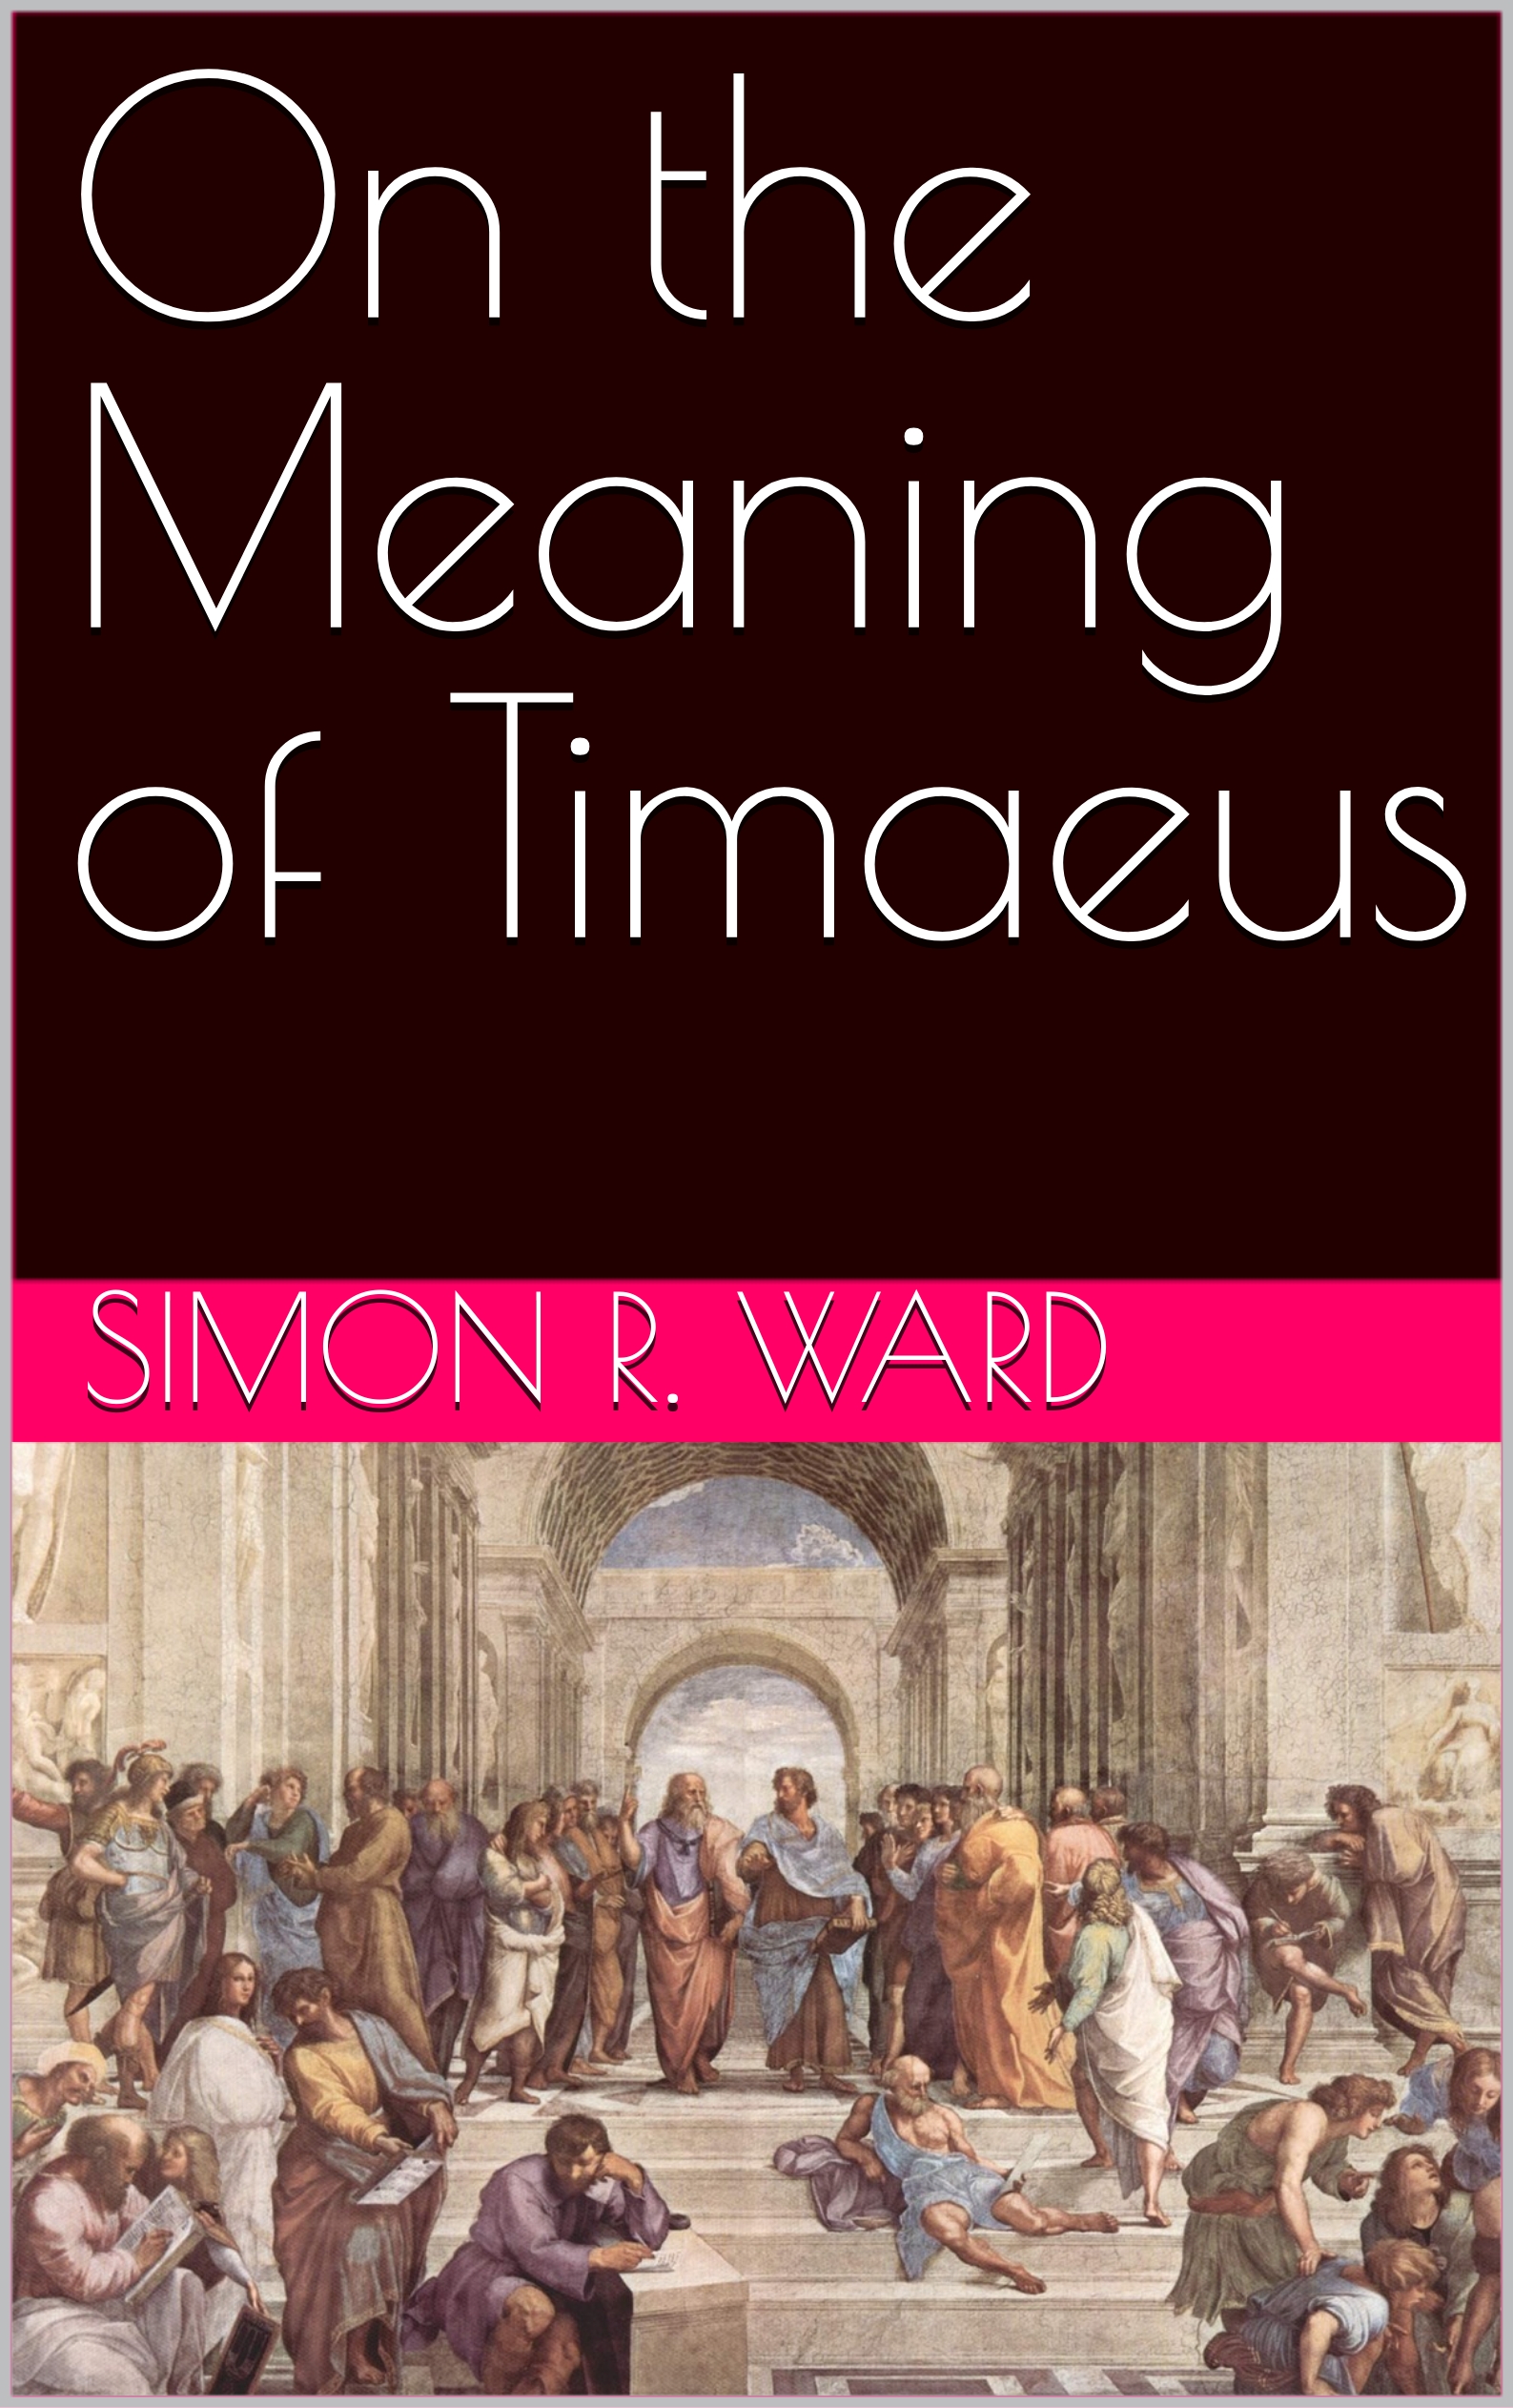 On the Meaning of Timaeus